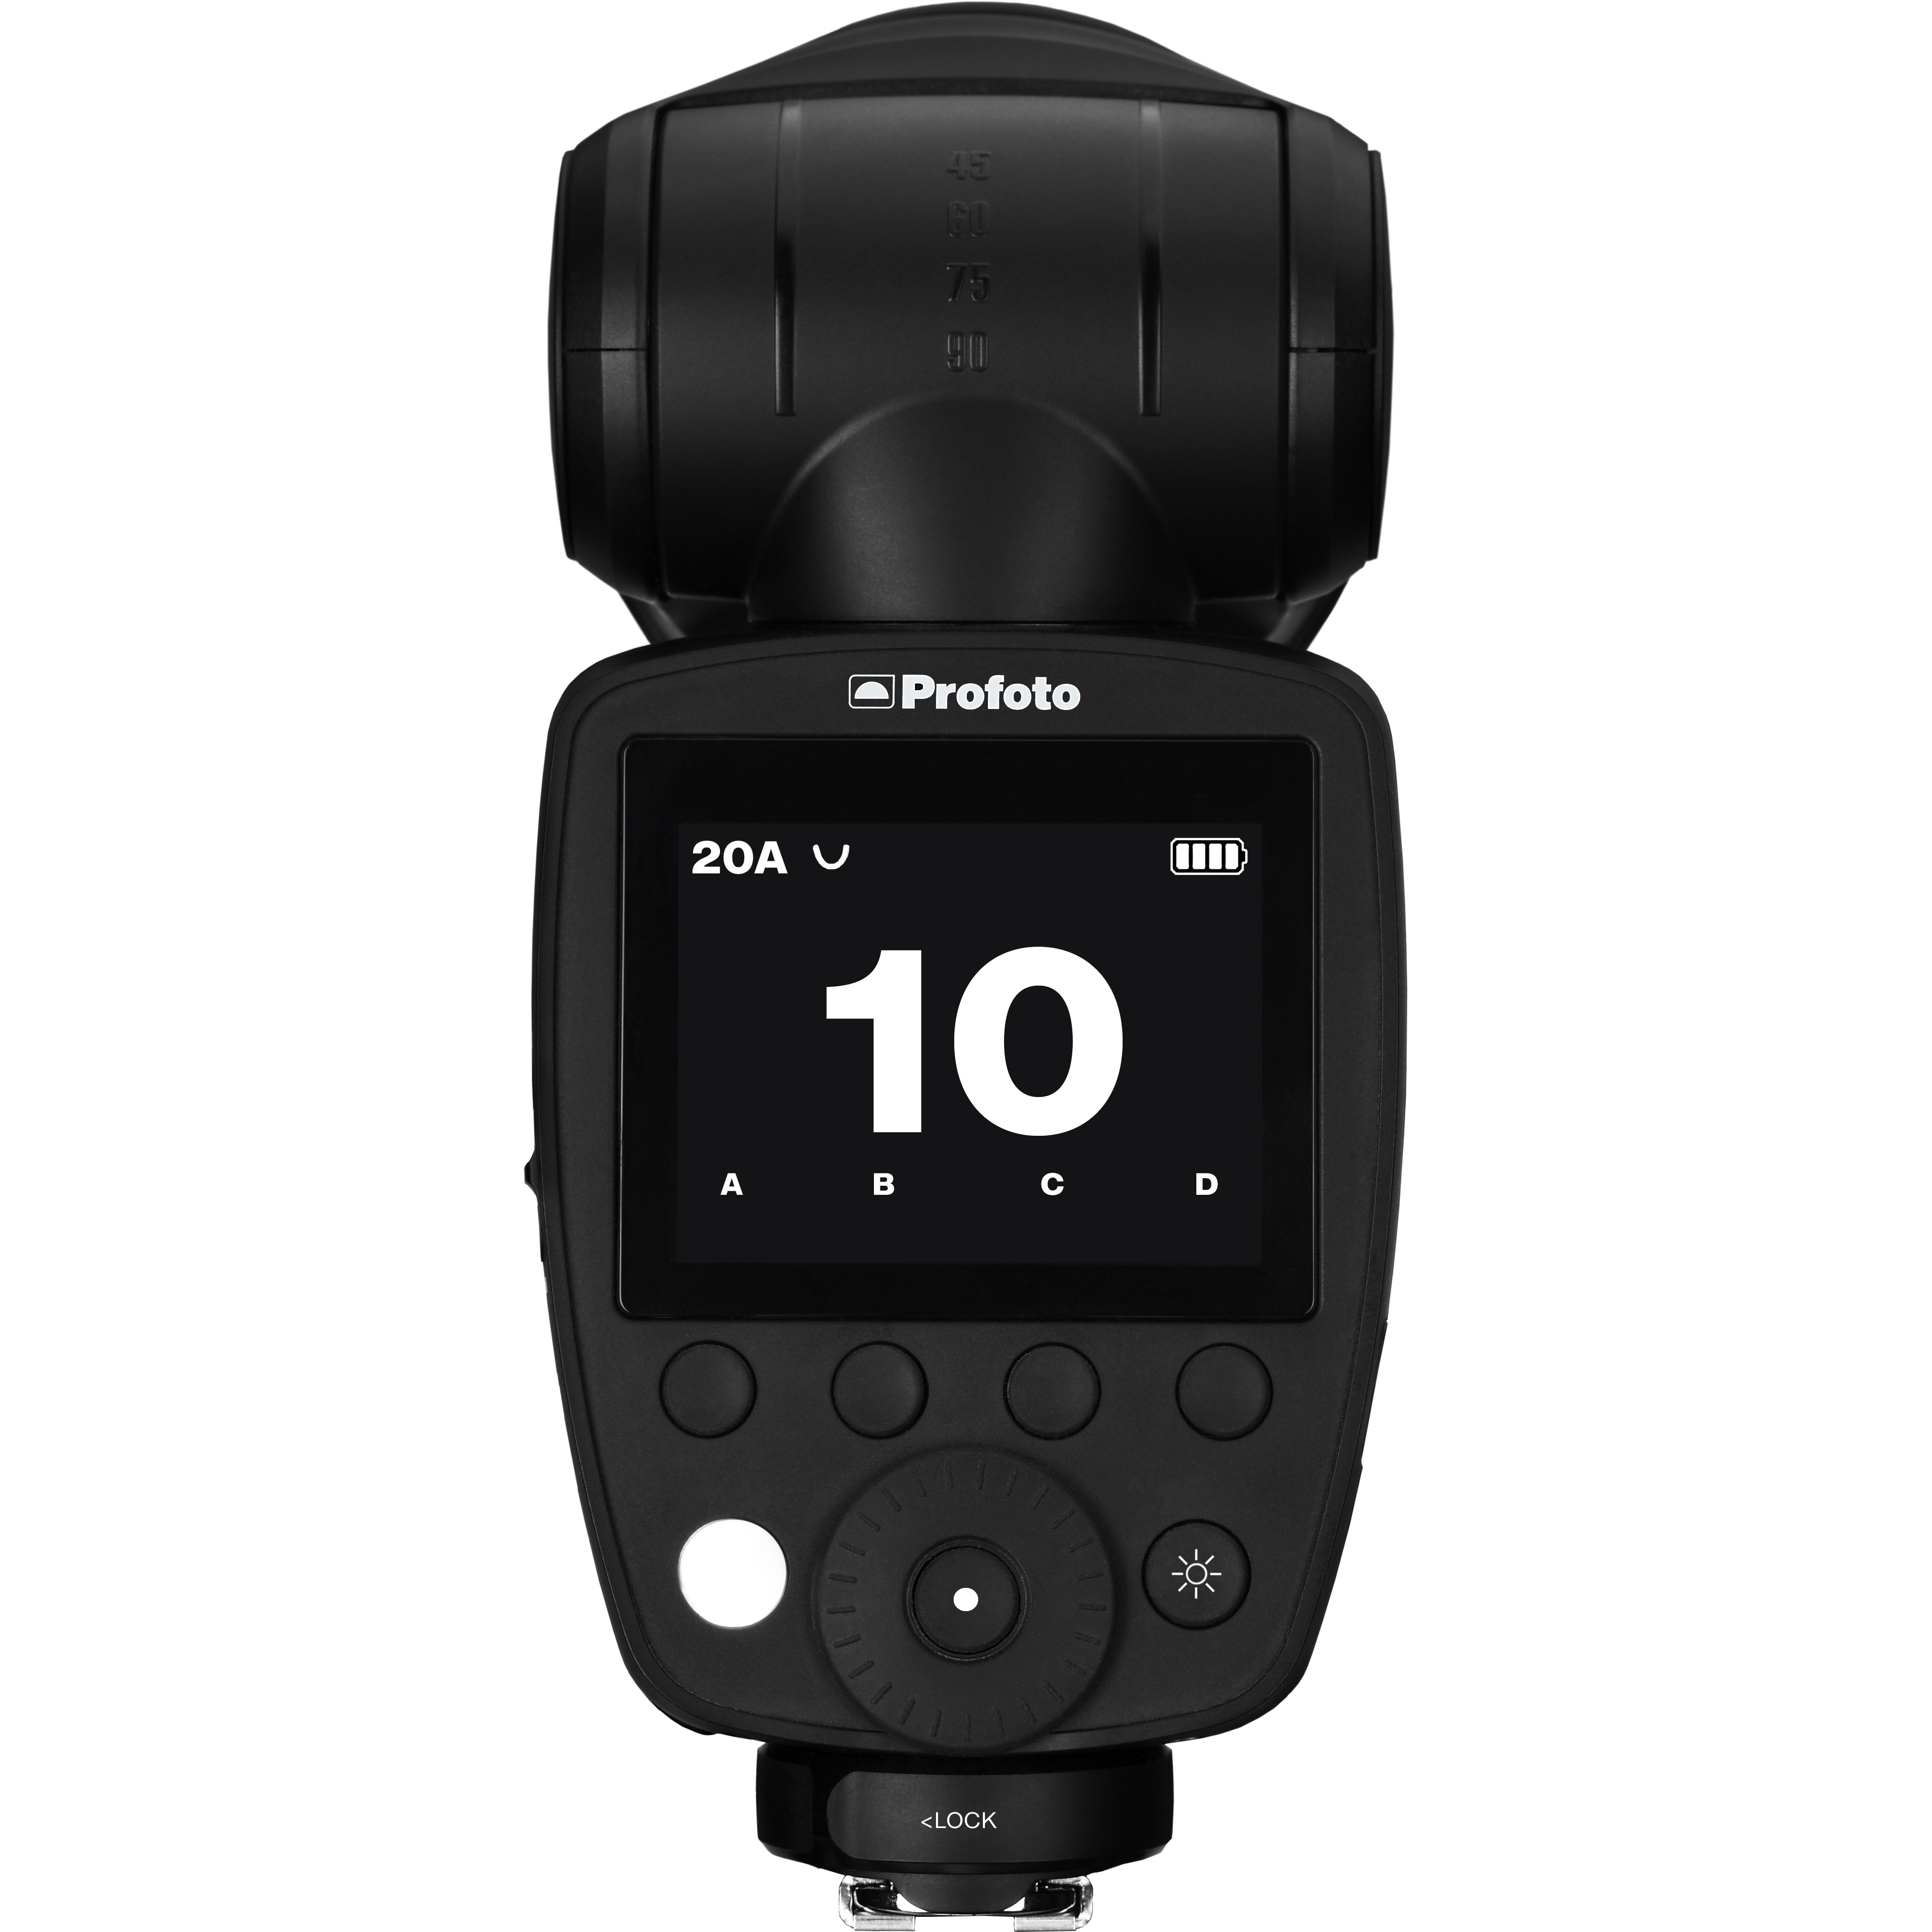 The Profoto A1X Replaces the Company's A1; Comes in Sony TTL